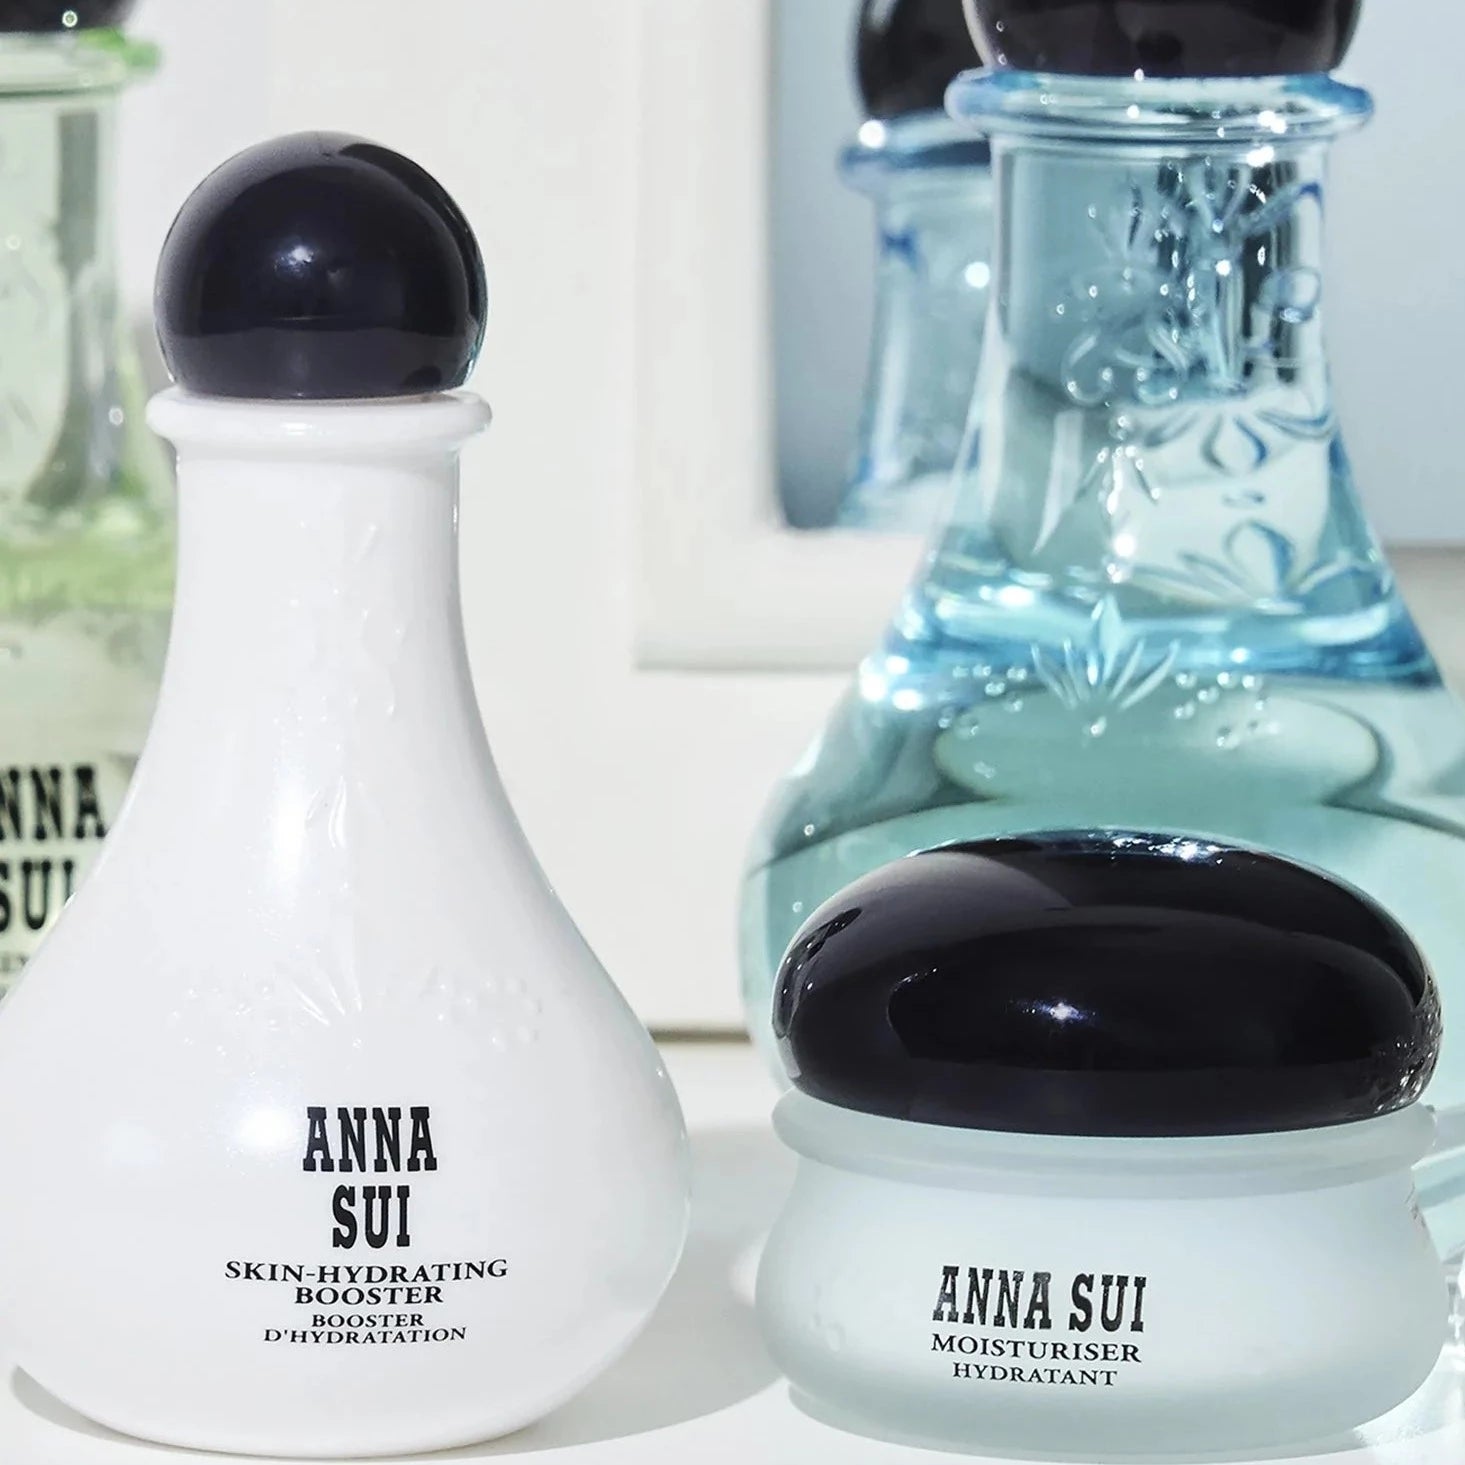 Anna Sui Skin-Hydrating Booster